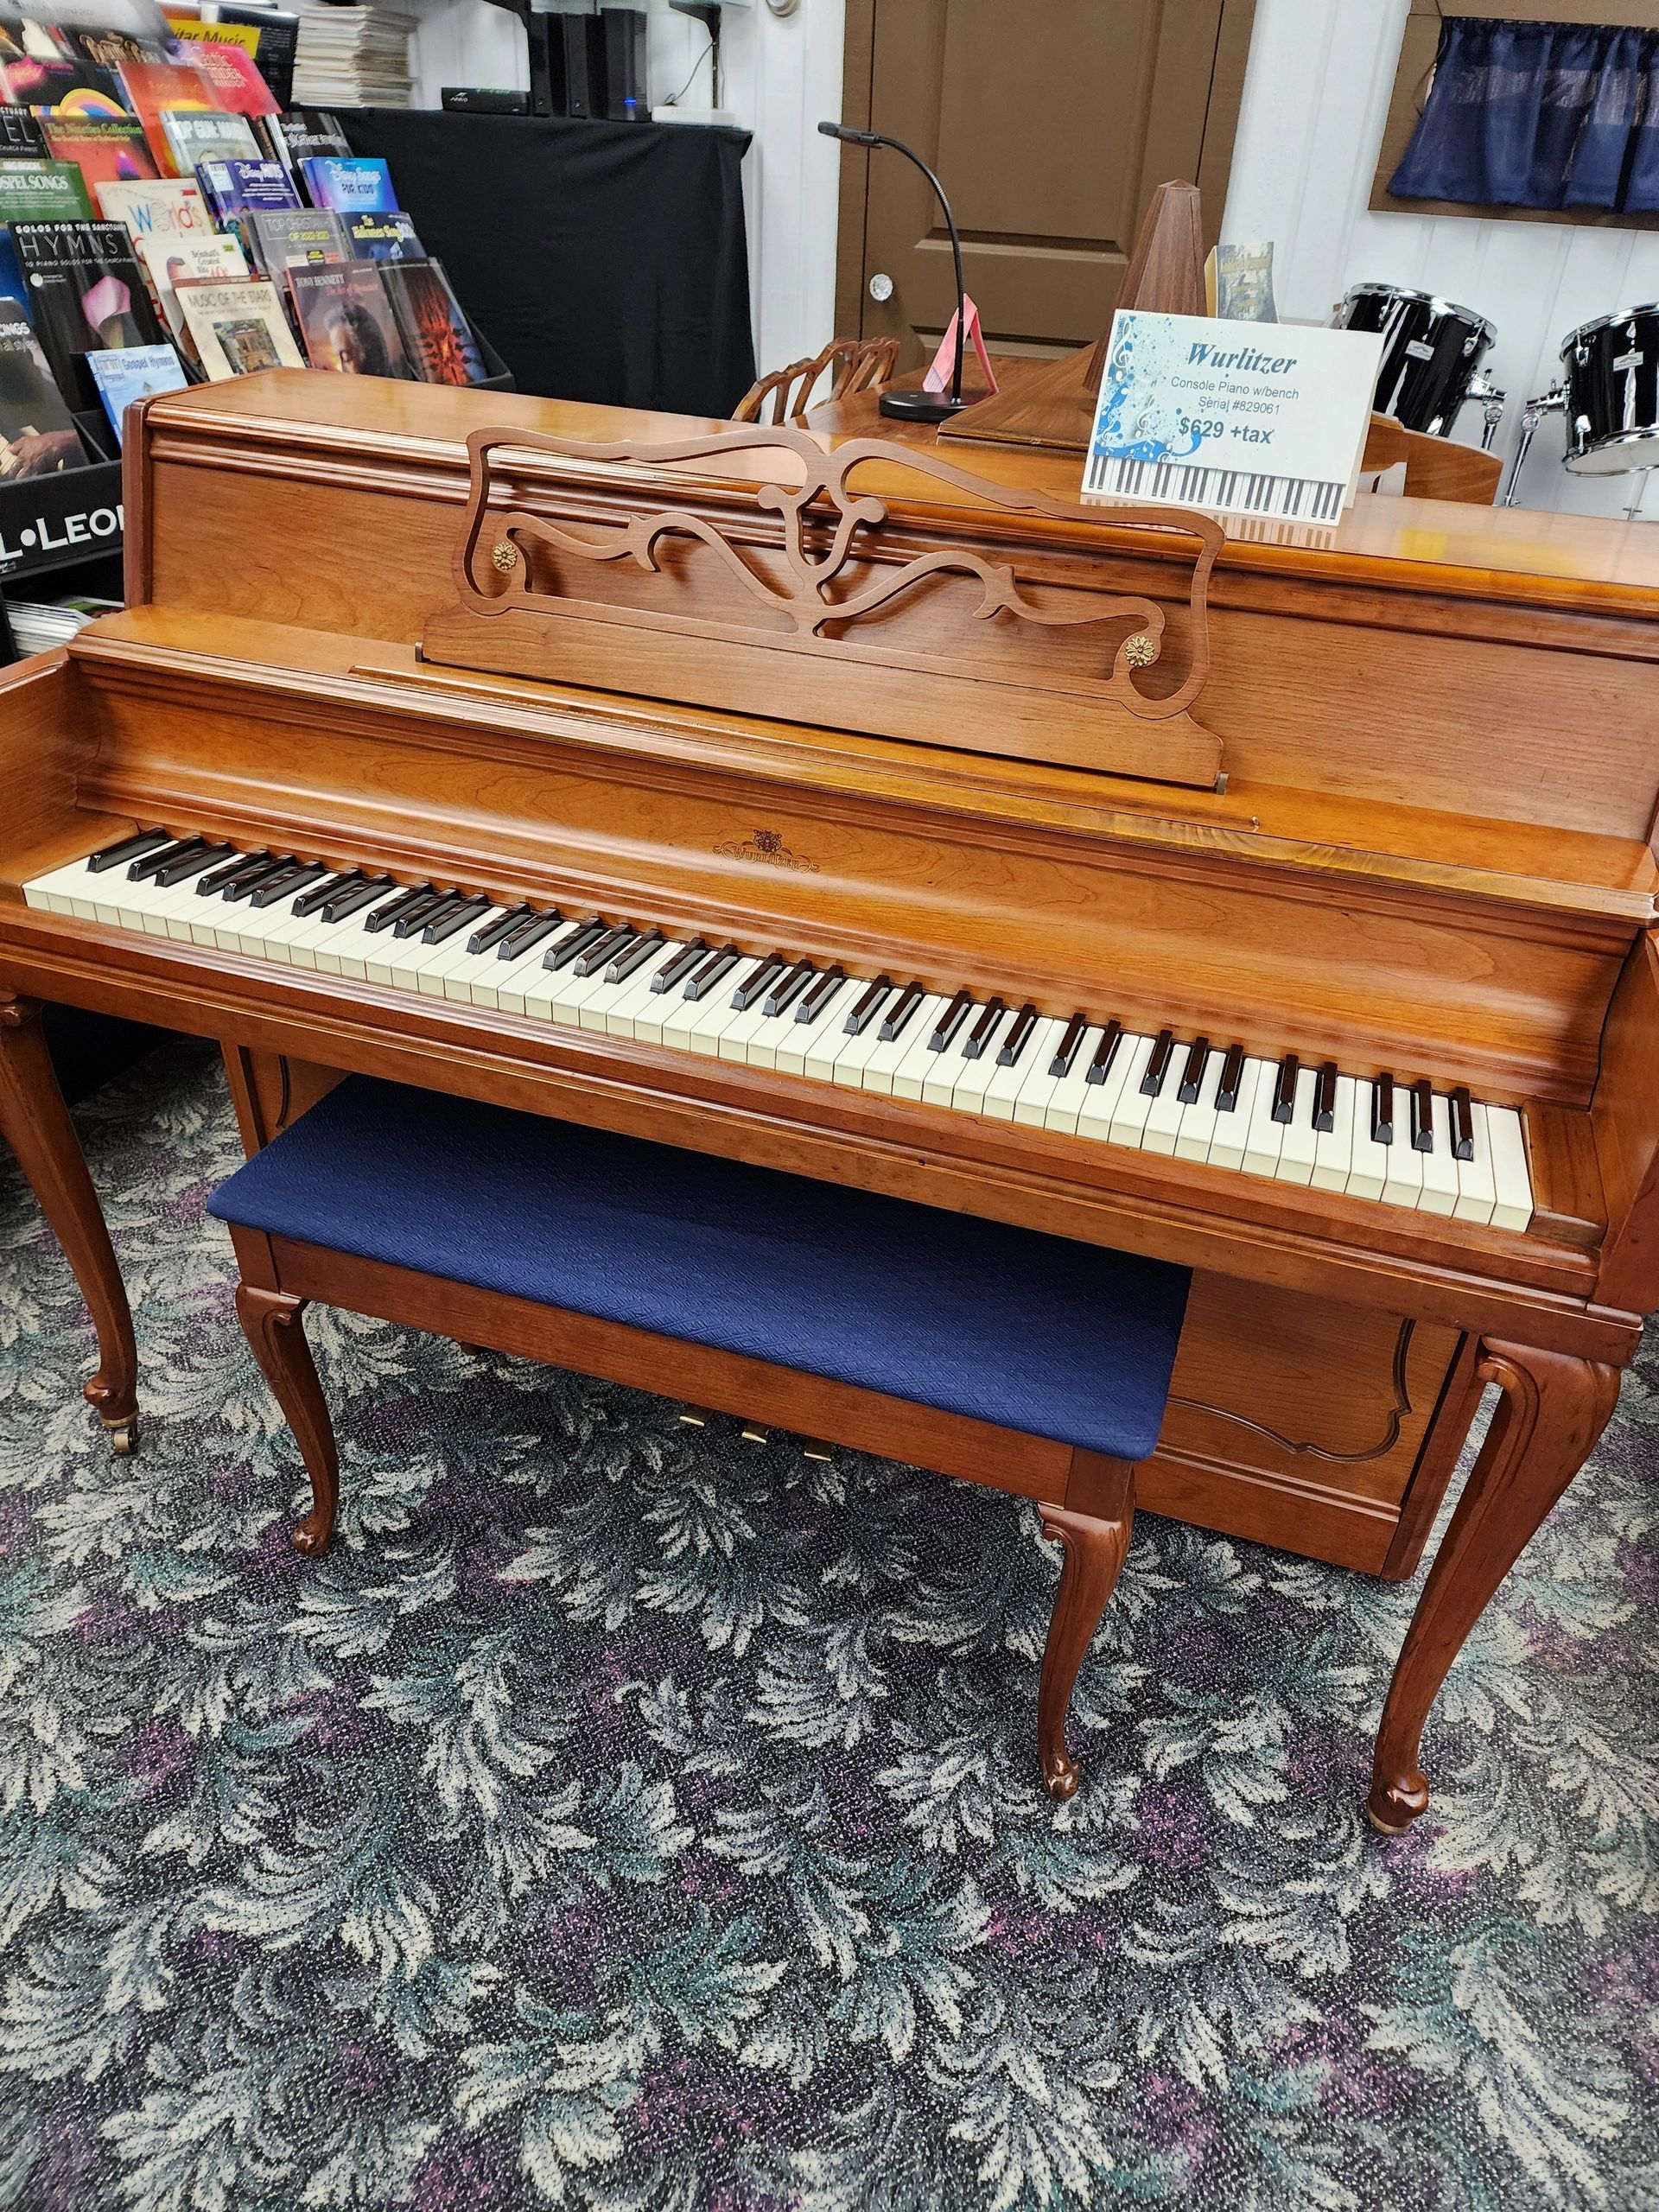 Wurlitzer French Provincial style piano.  Originally $629 now 30% OFF - Just $440!